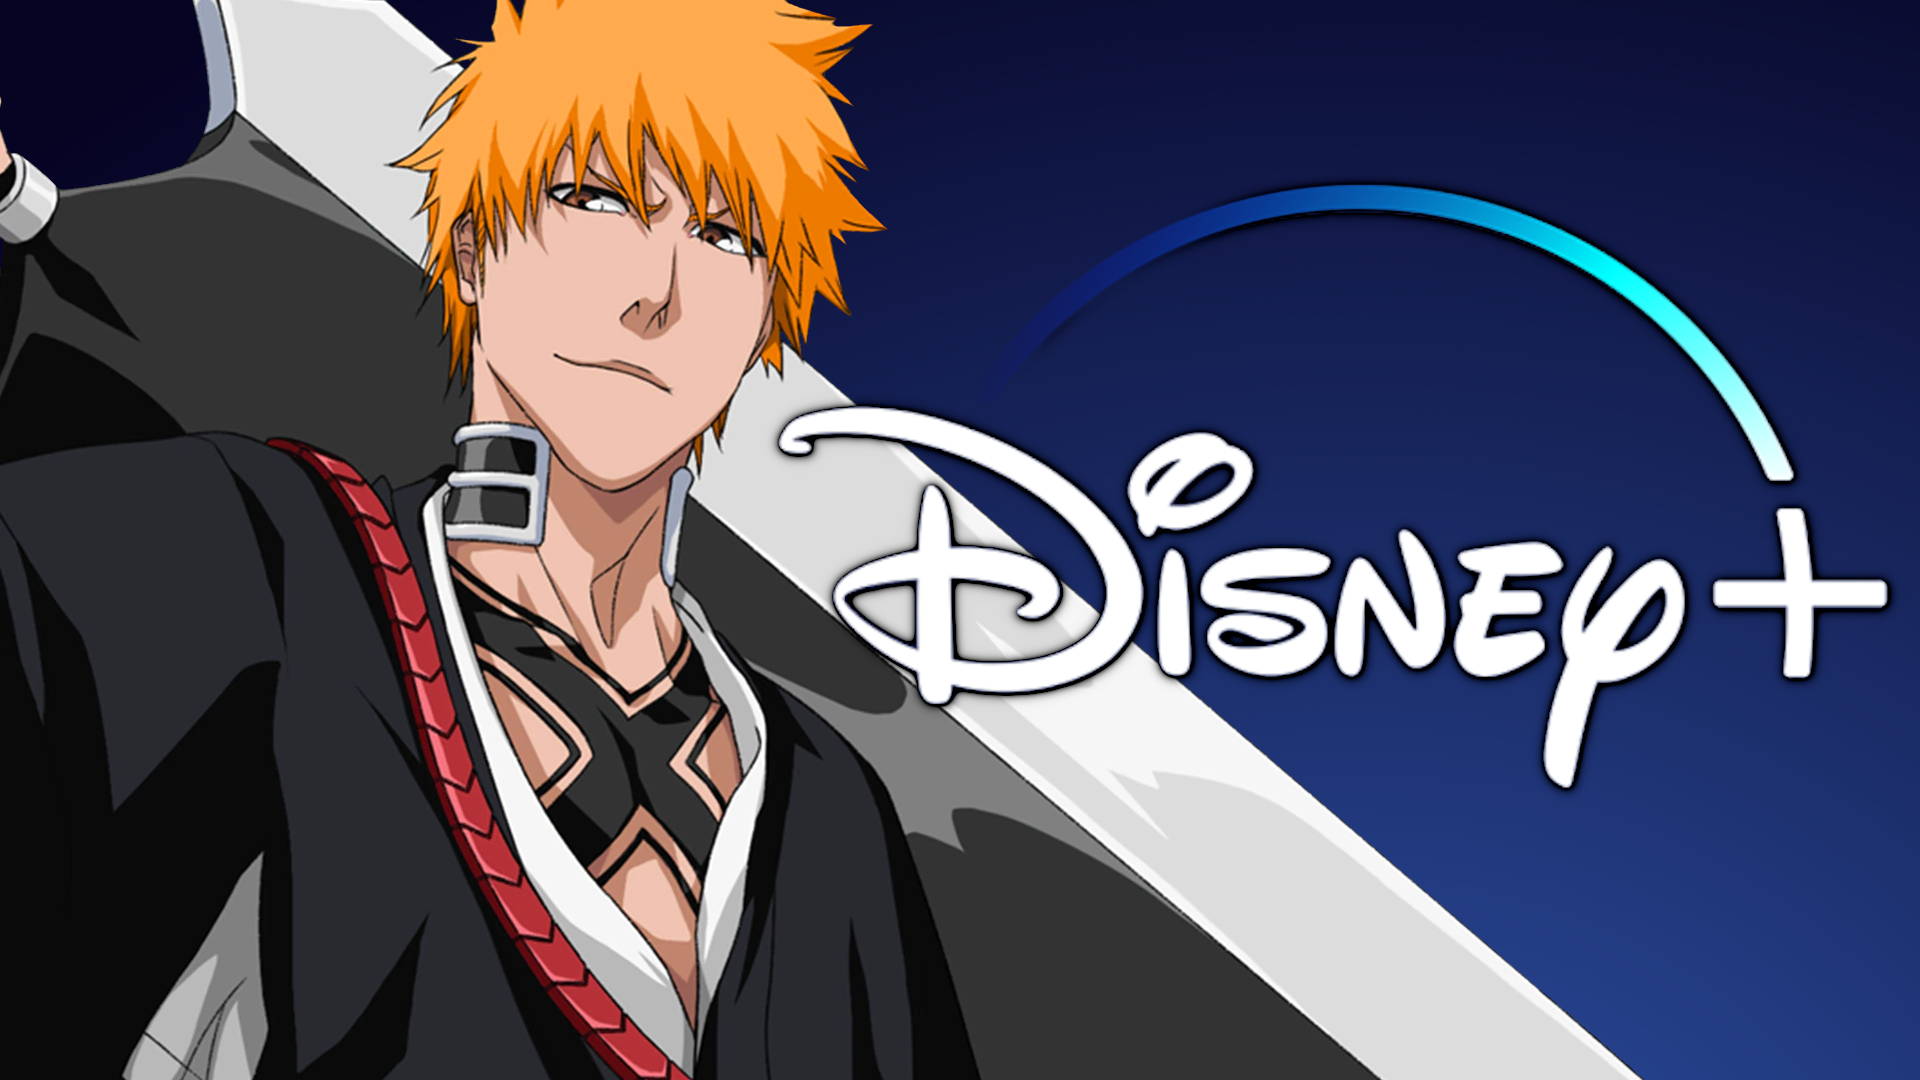 JaymesHanson on X: ❗️❗️❗️NEW BLEACH NEWS VIDEO❗️❗️❗️ 🔥BLEACH Anime 2022  Pacing LEAKED! & More🔥 🔗:  Please LIKE!❤️,🔁&  SUBSCRIBE!✓  / X